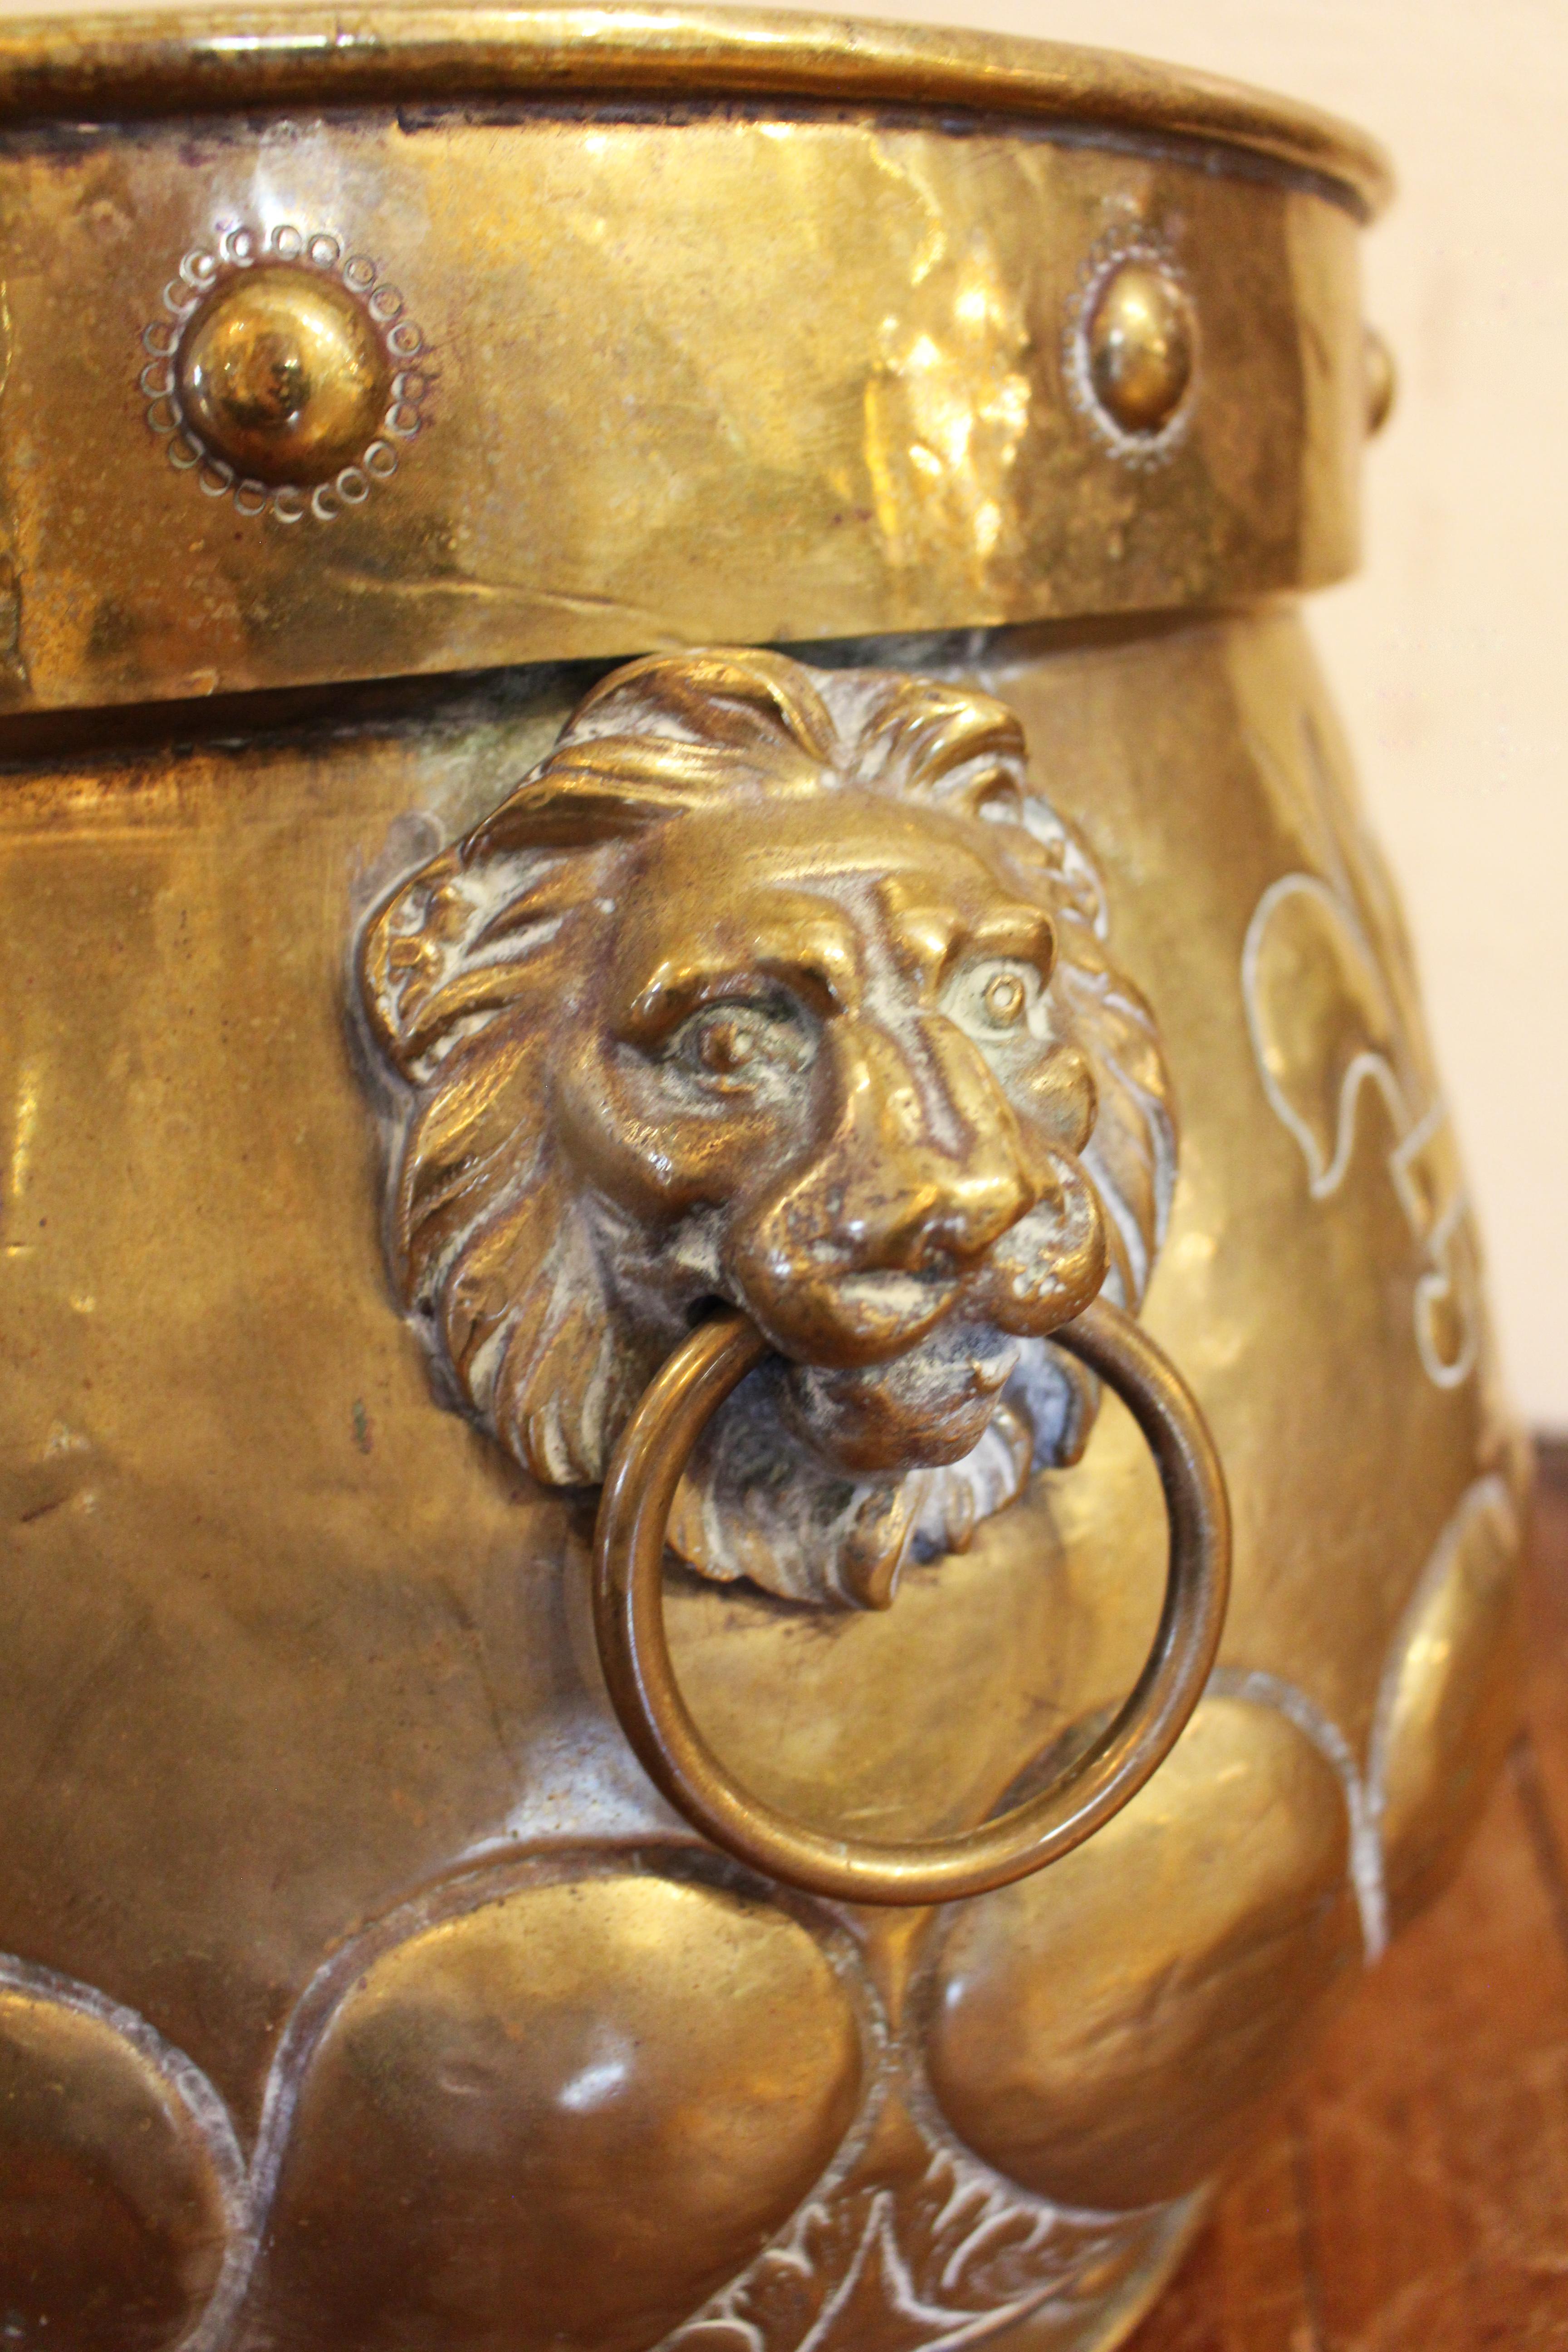 Repoussé Late 19th Century English Brass Coal Hod or Jardiniere with Lion Ring Handles